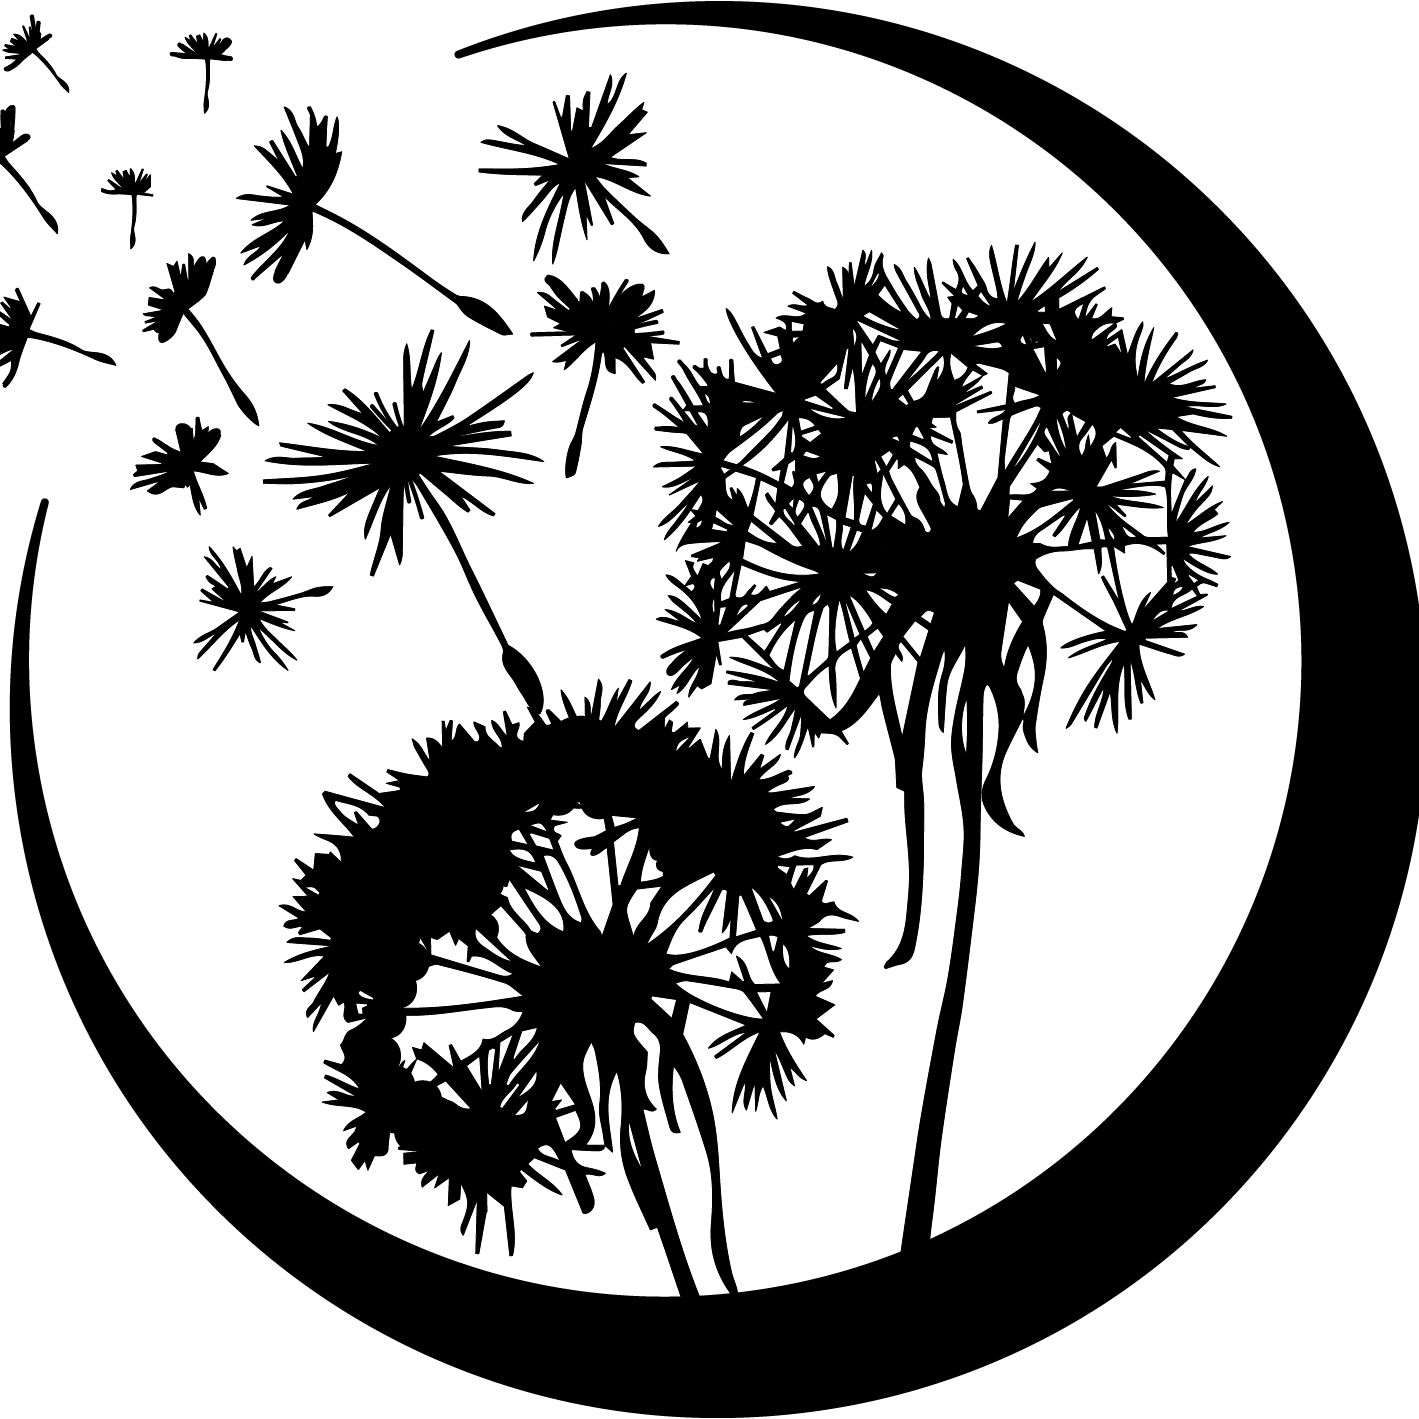 a black and white picture of a dandelion.